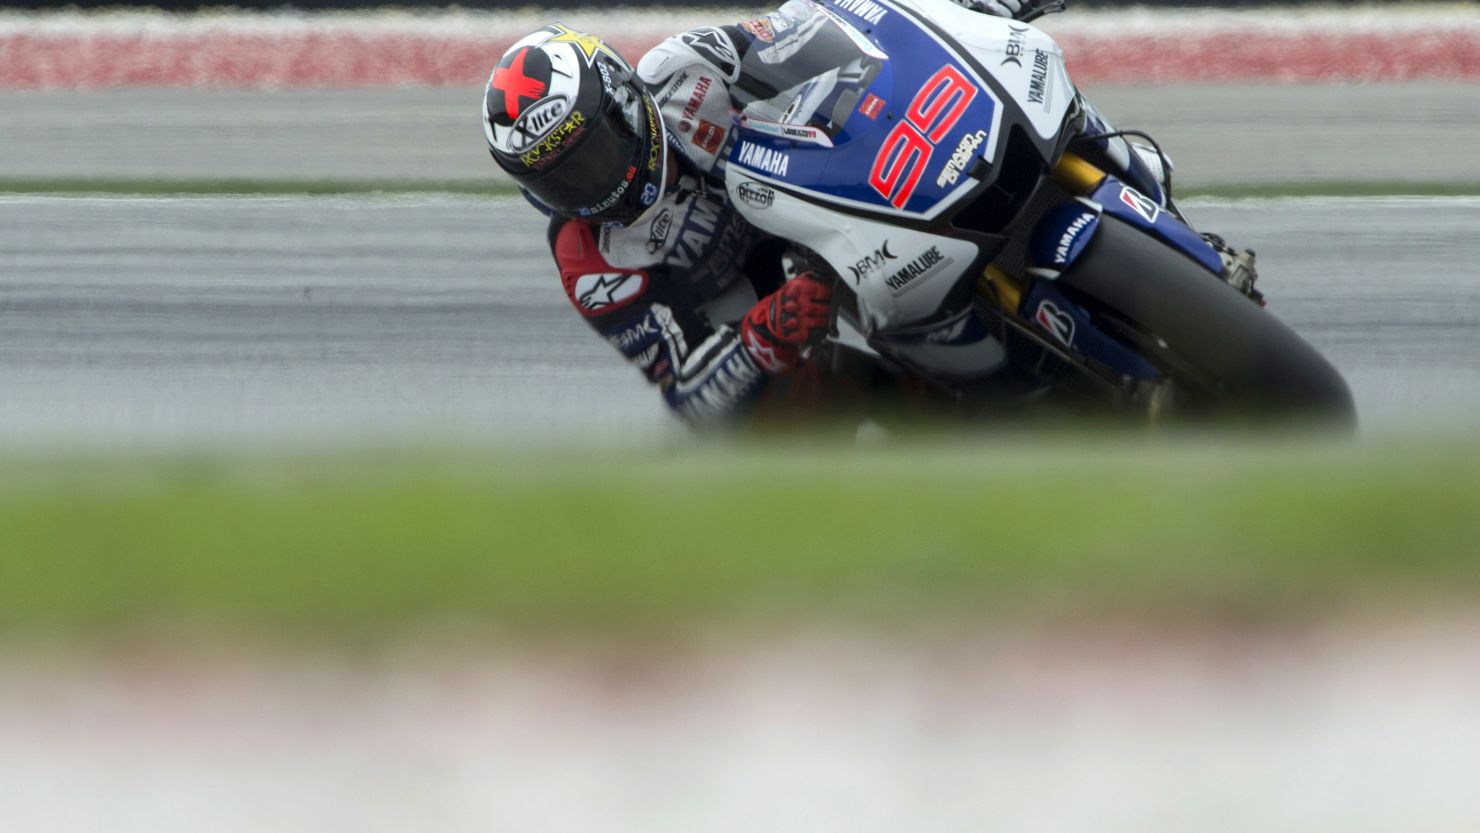 Spain's Jorge Lorenzo beat Valentino Rossi's lap record at the Sepang International Circuit in qualifying.